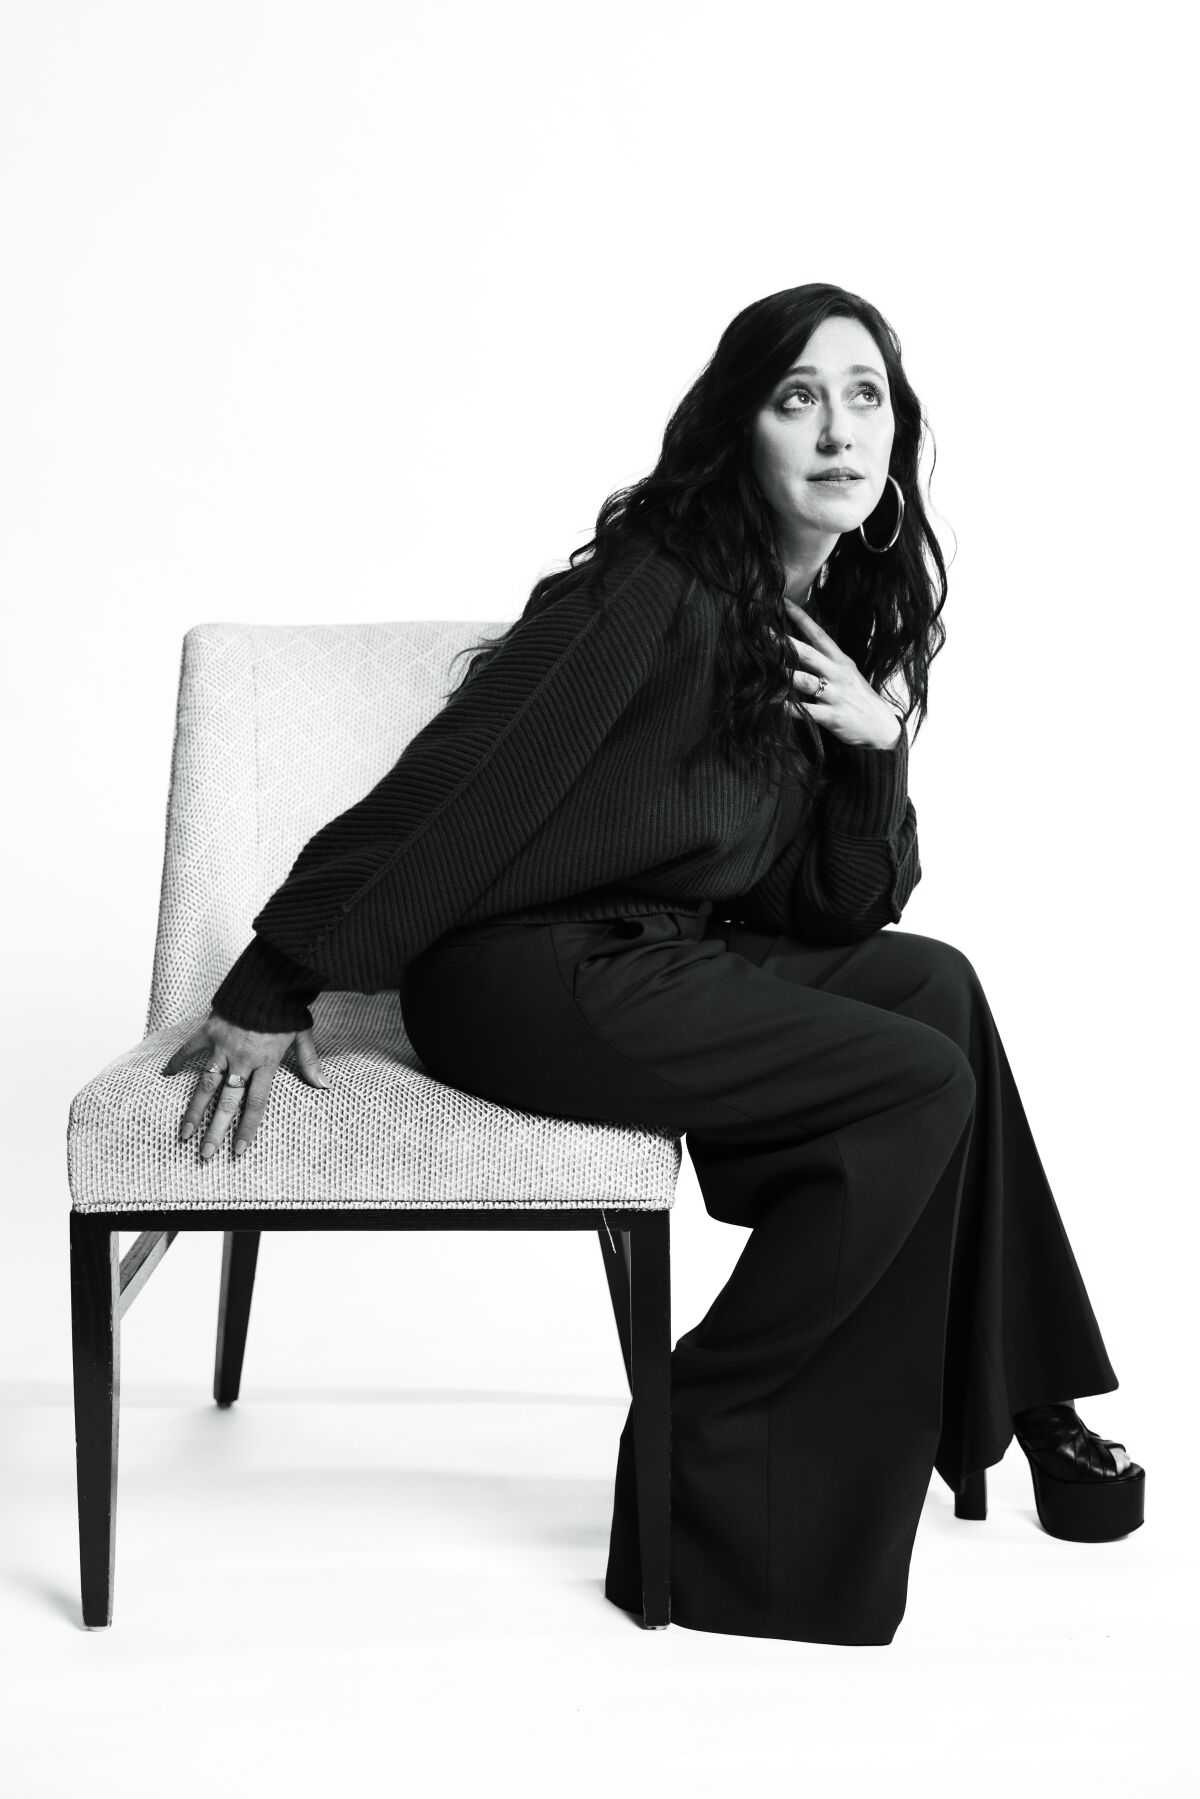 Actor Mariana Trevino sits on the side of a chair, eyes raised skyward for a portrait.